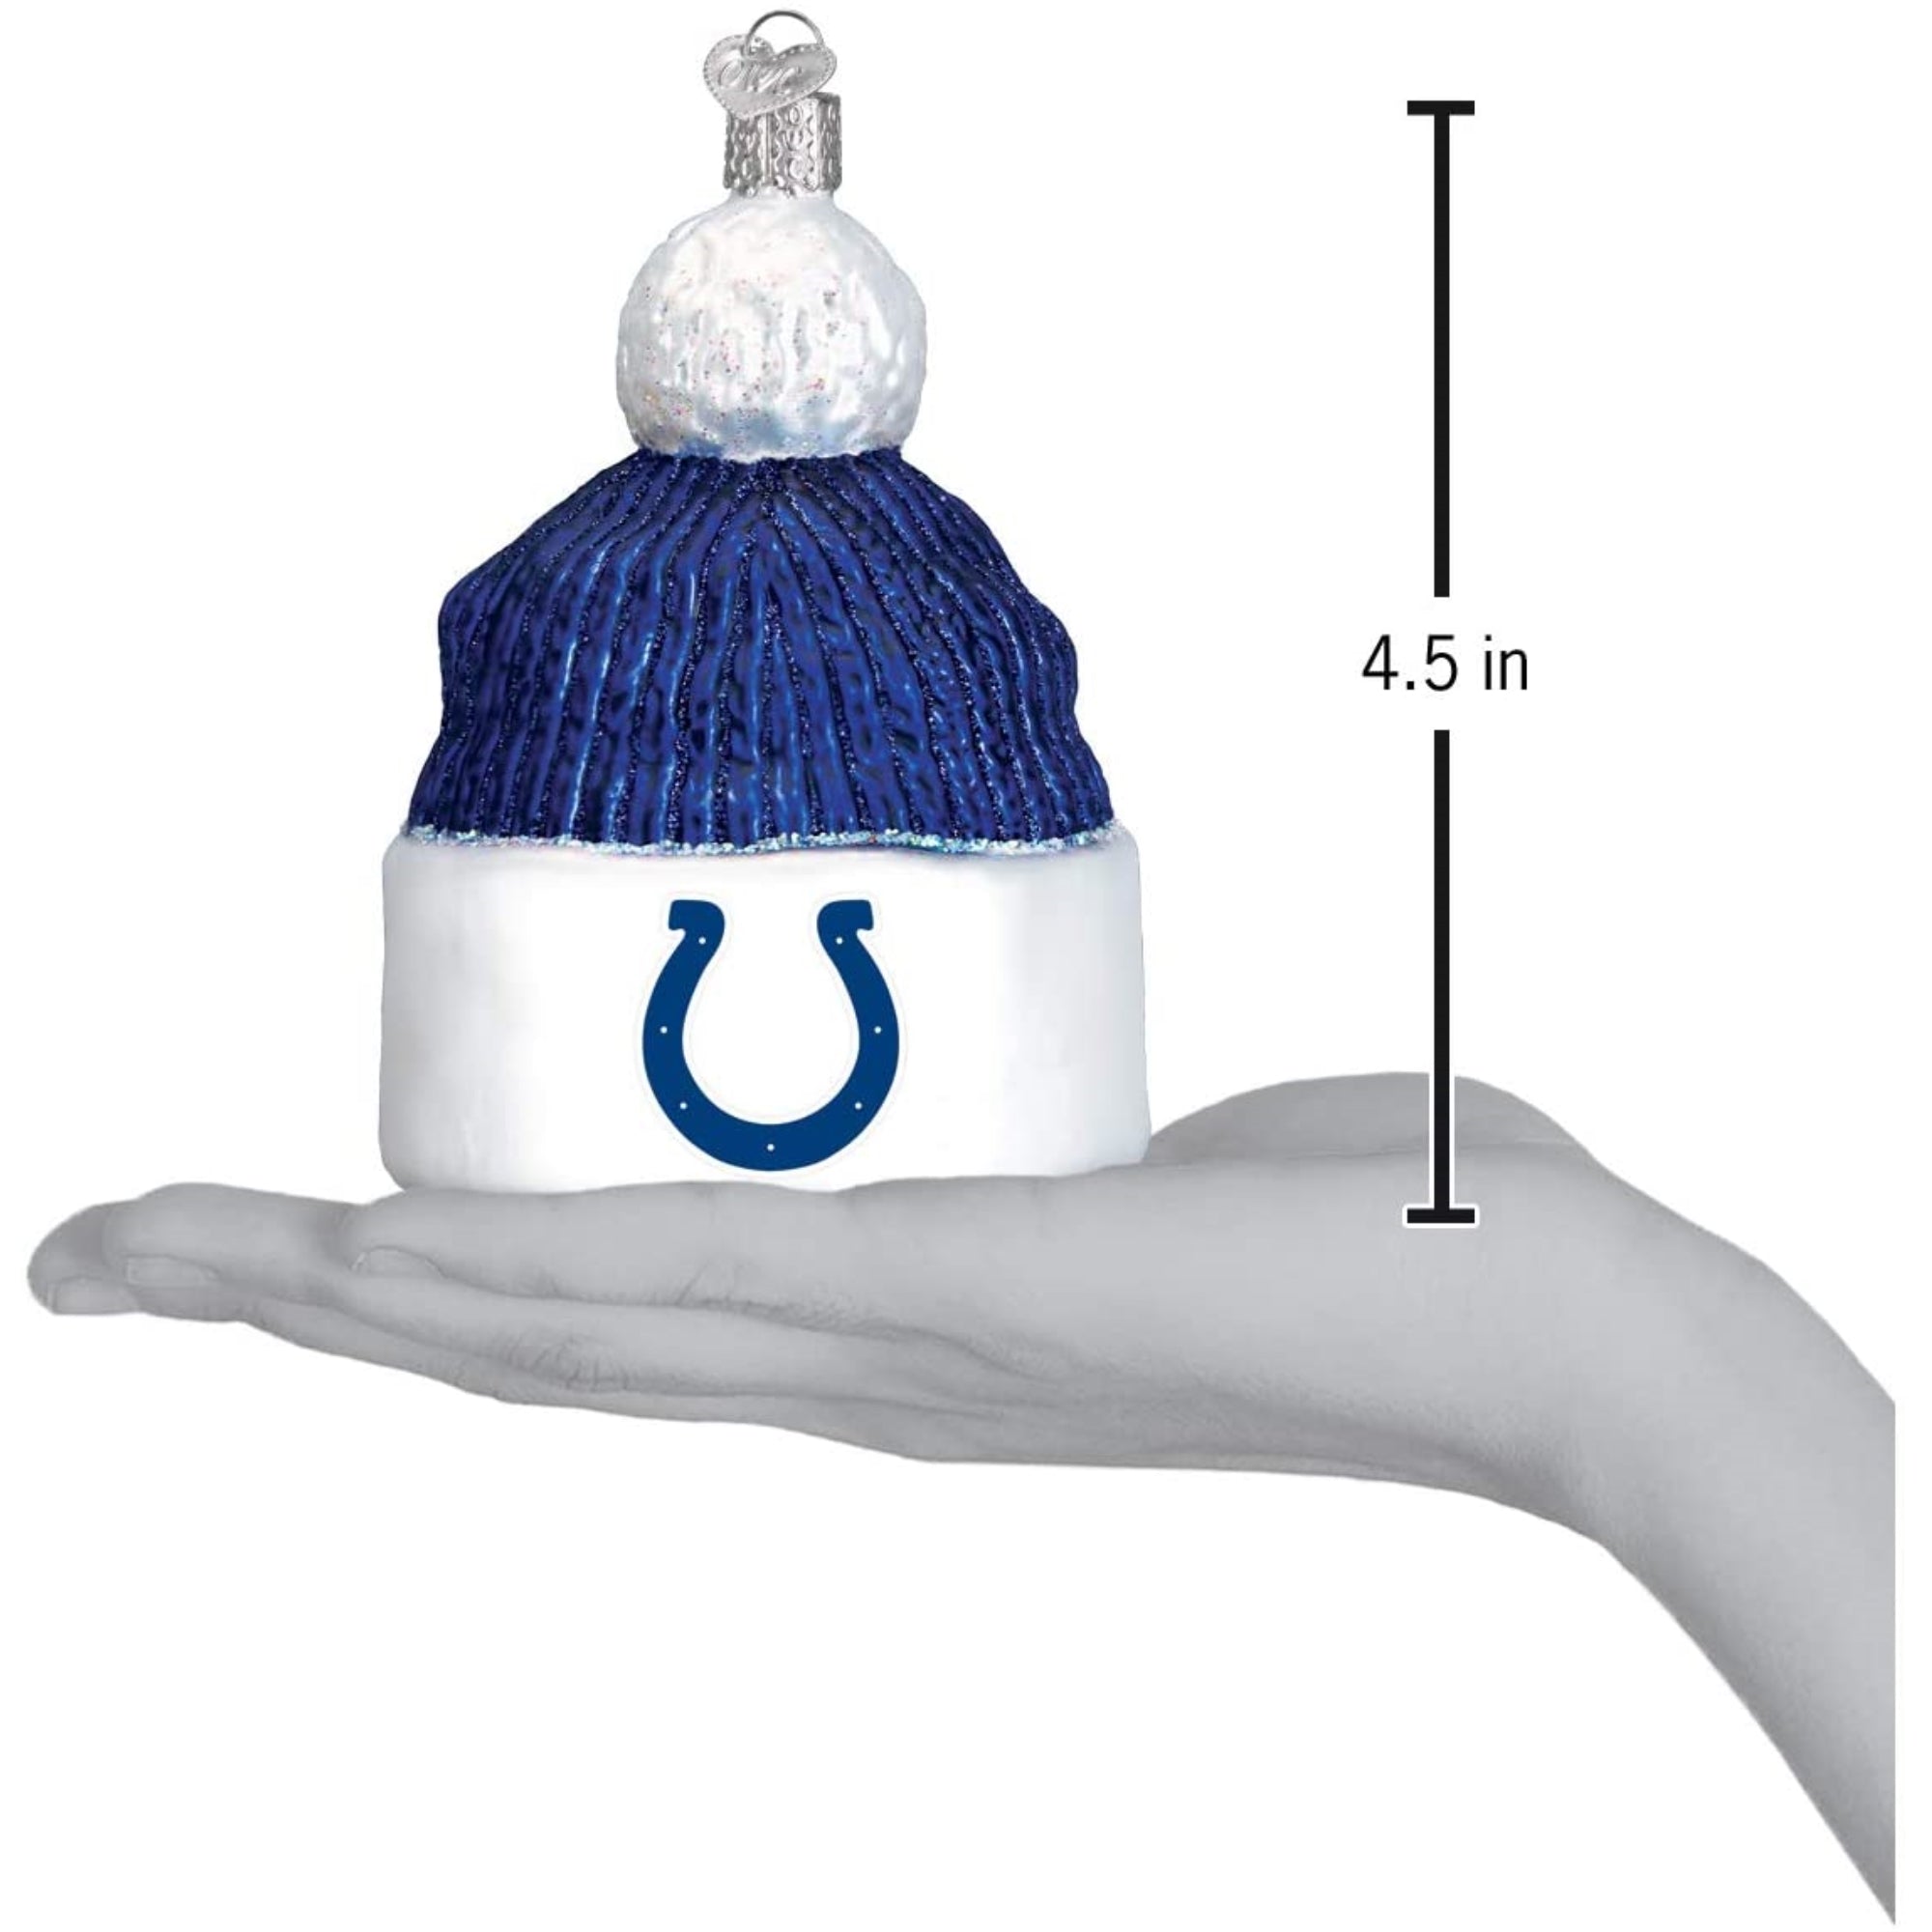 Old World Christmas Indianapolis Colts Beanie Ornament For Christmas Tree